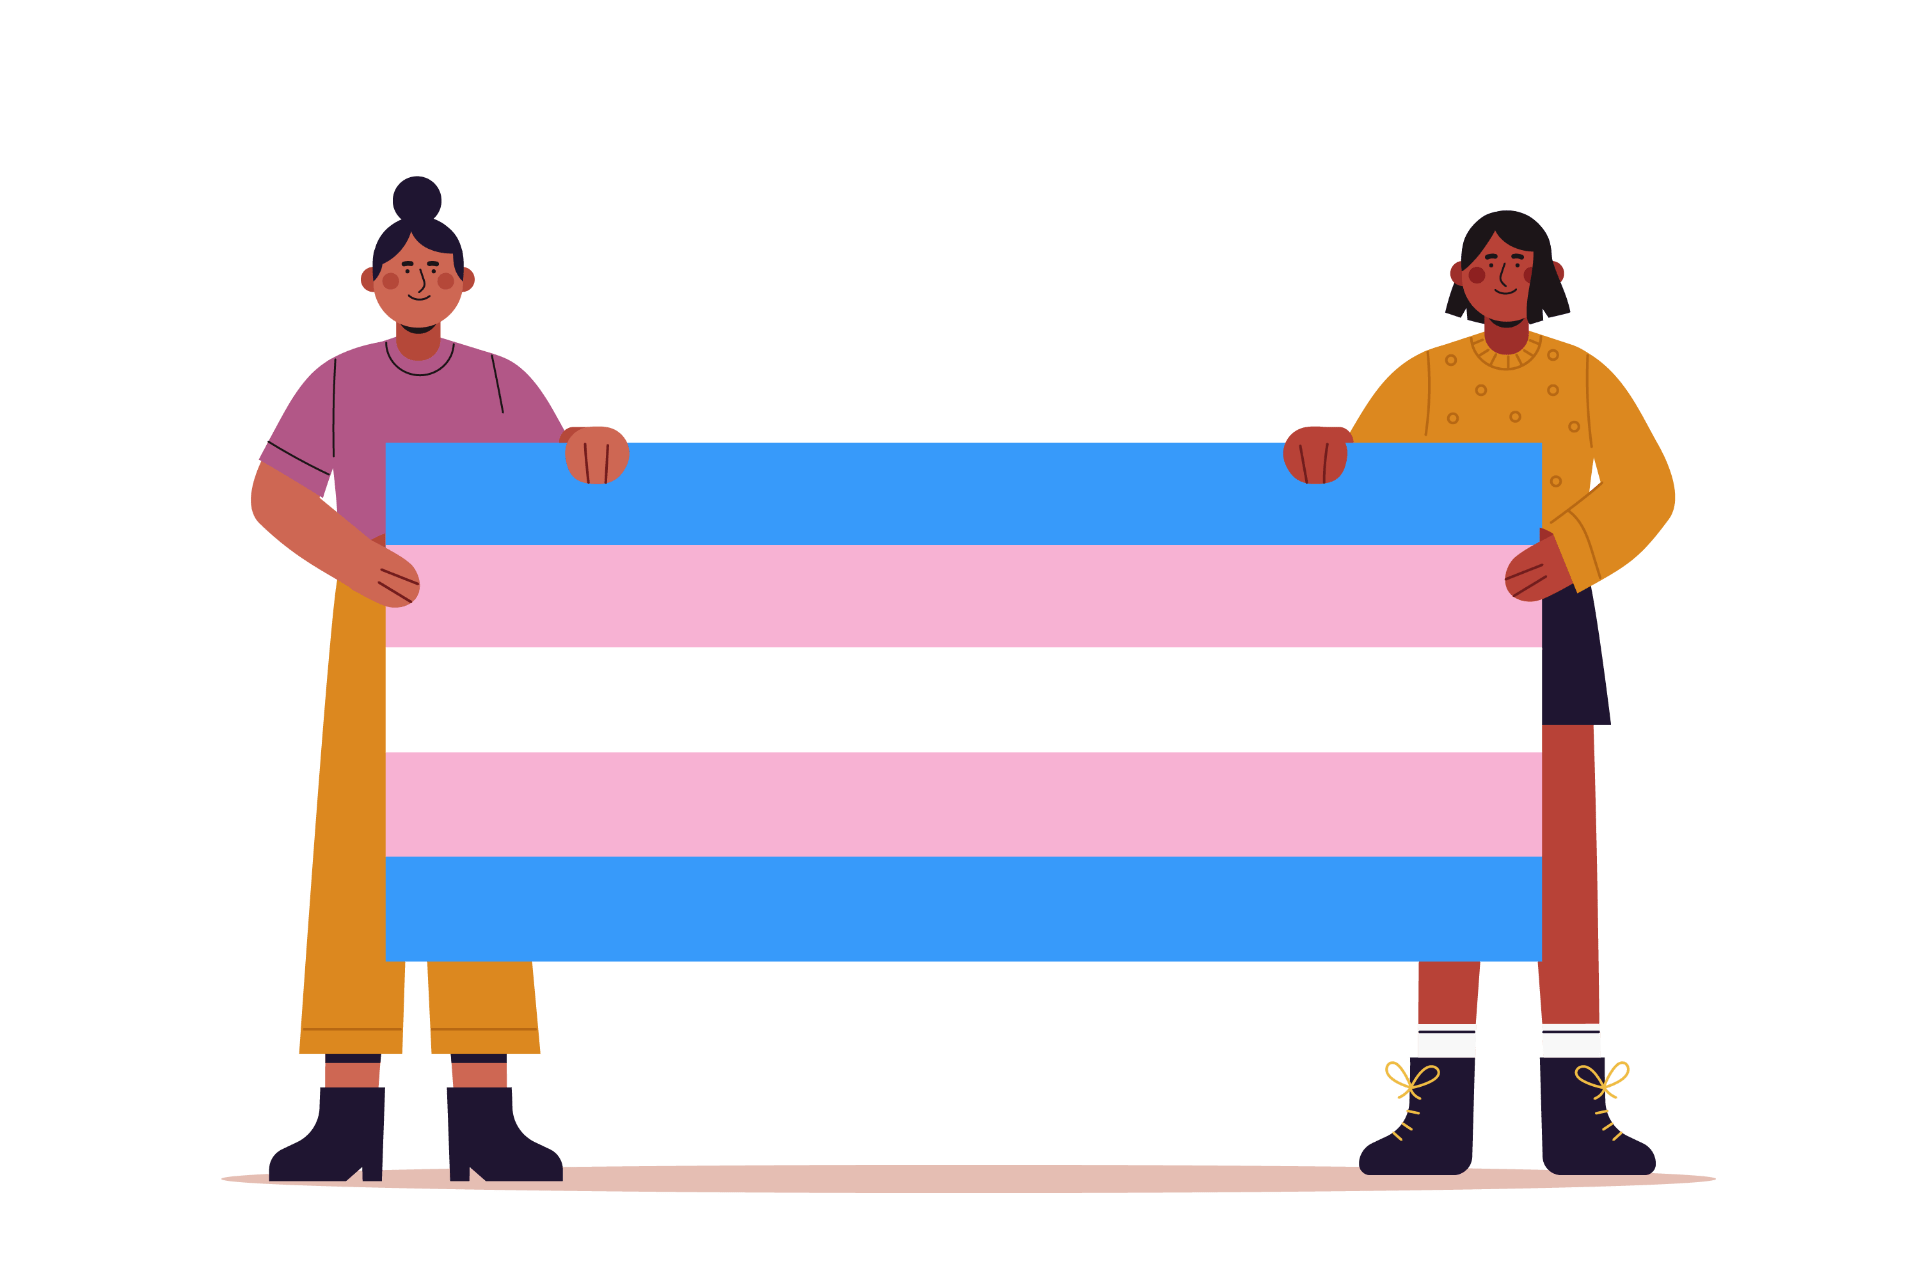 A vector illustration of two brown trans women/transfeminine people holding up a trans flag.